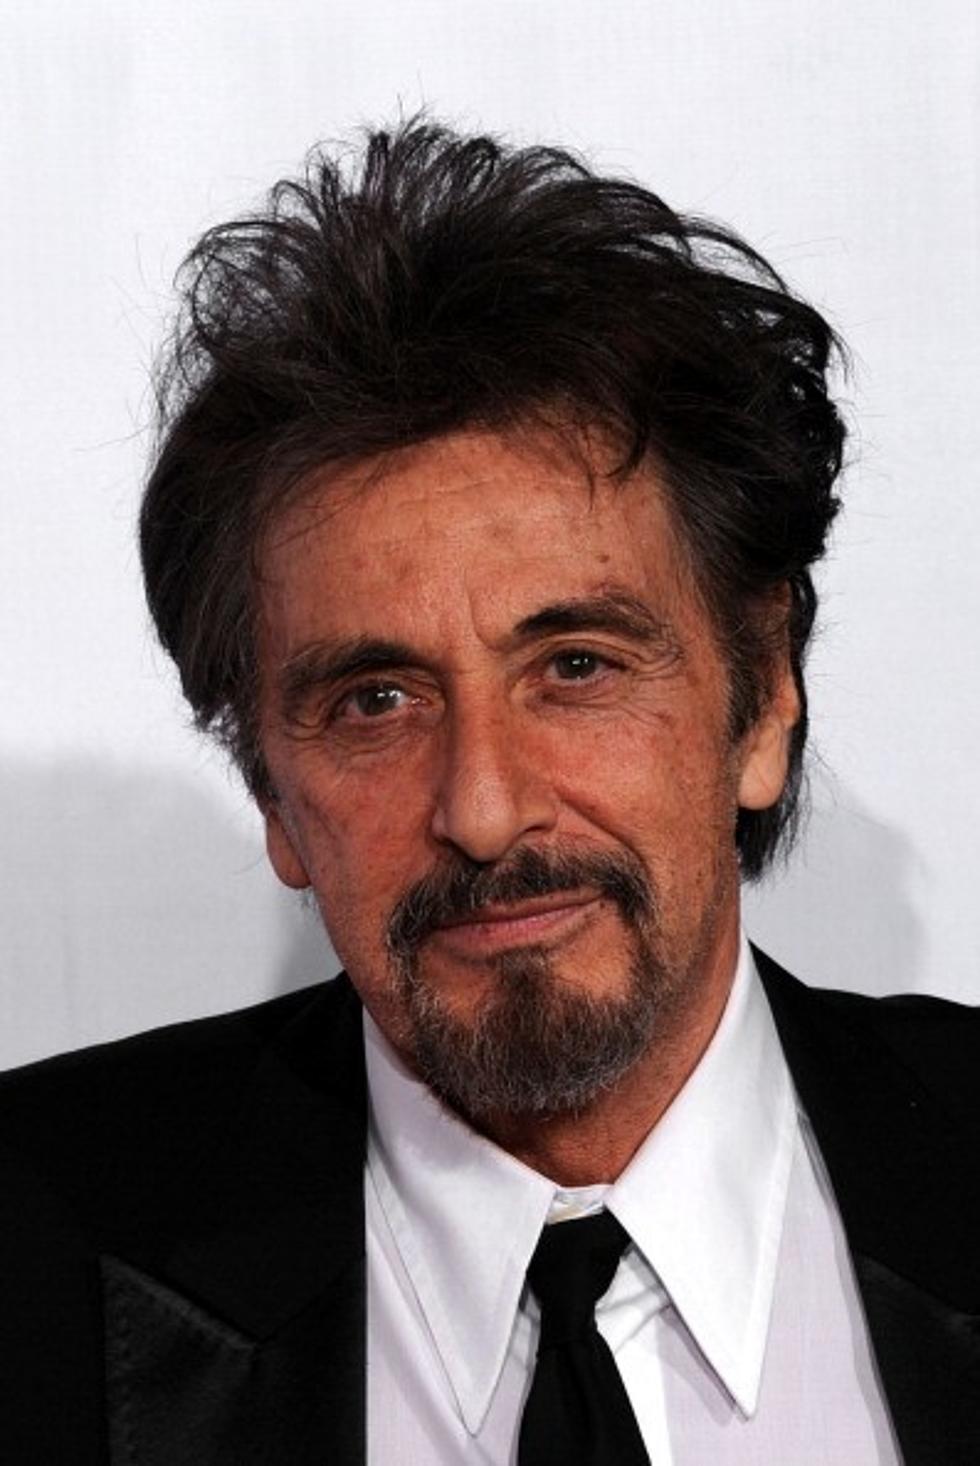 The IRS is “Just Getting Warmed UUUPPPP” with Al Pacino